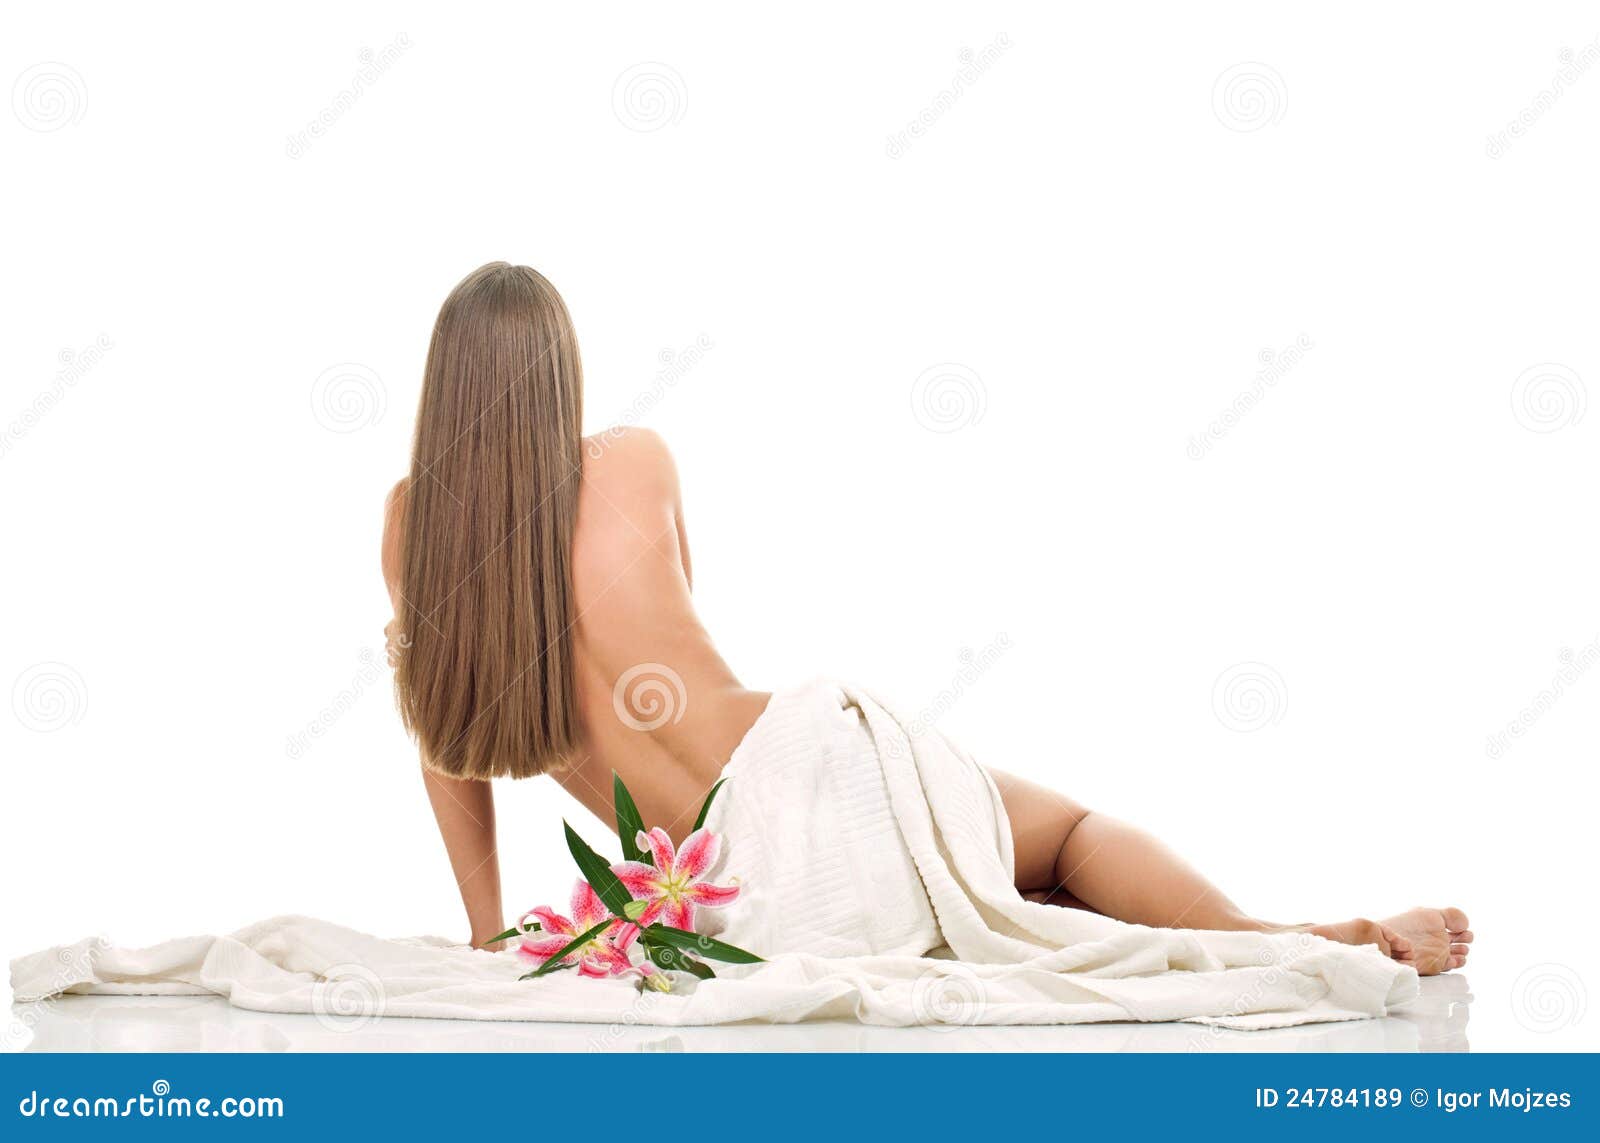 Spa Woman Relaxing Royalty Free Stock Images Image 24784189